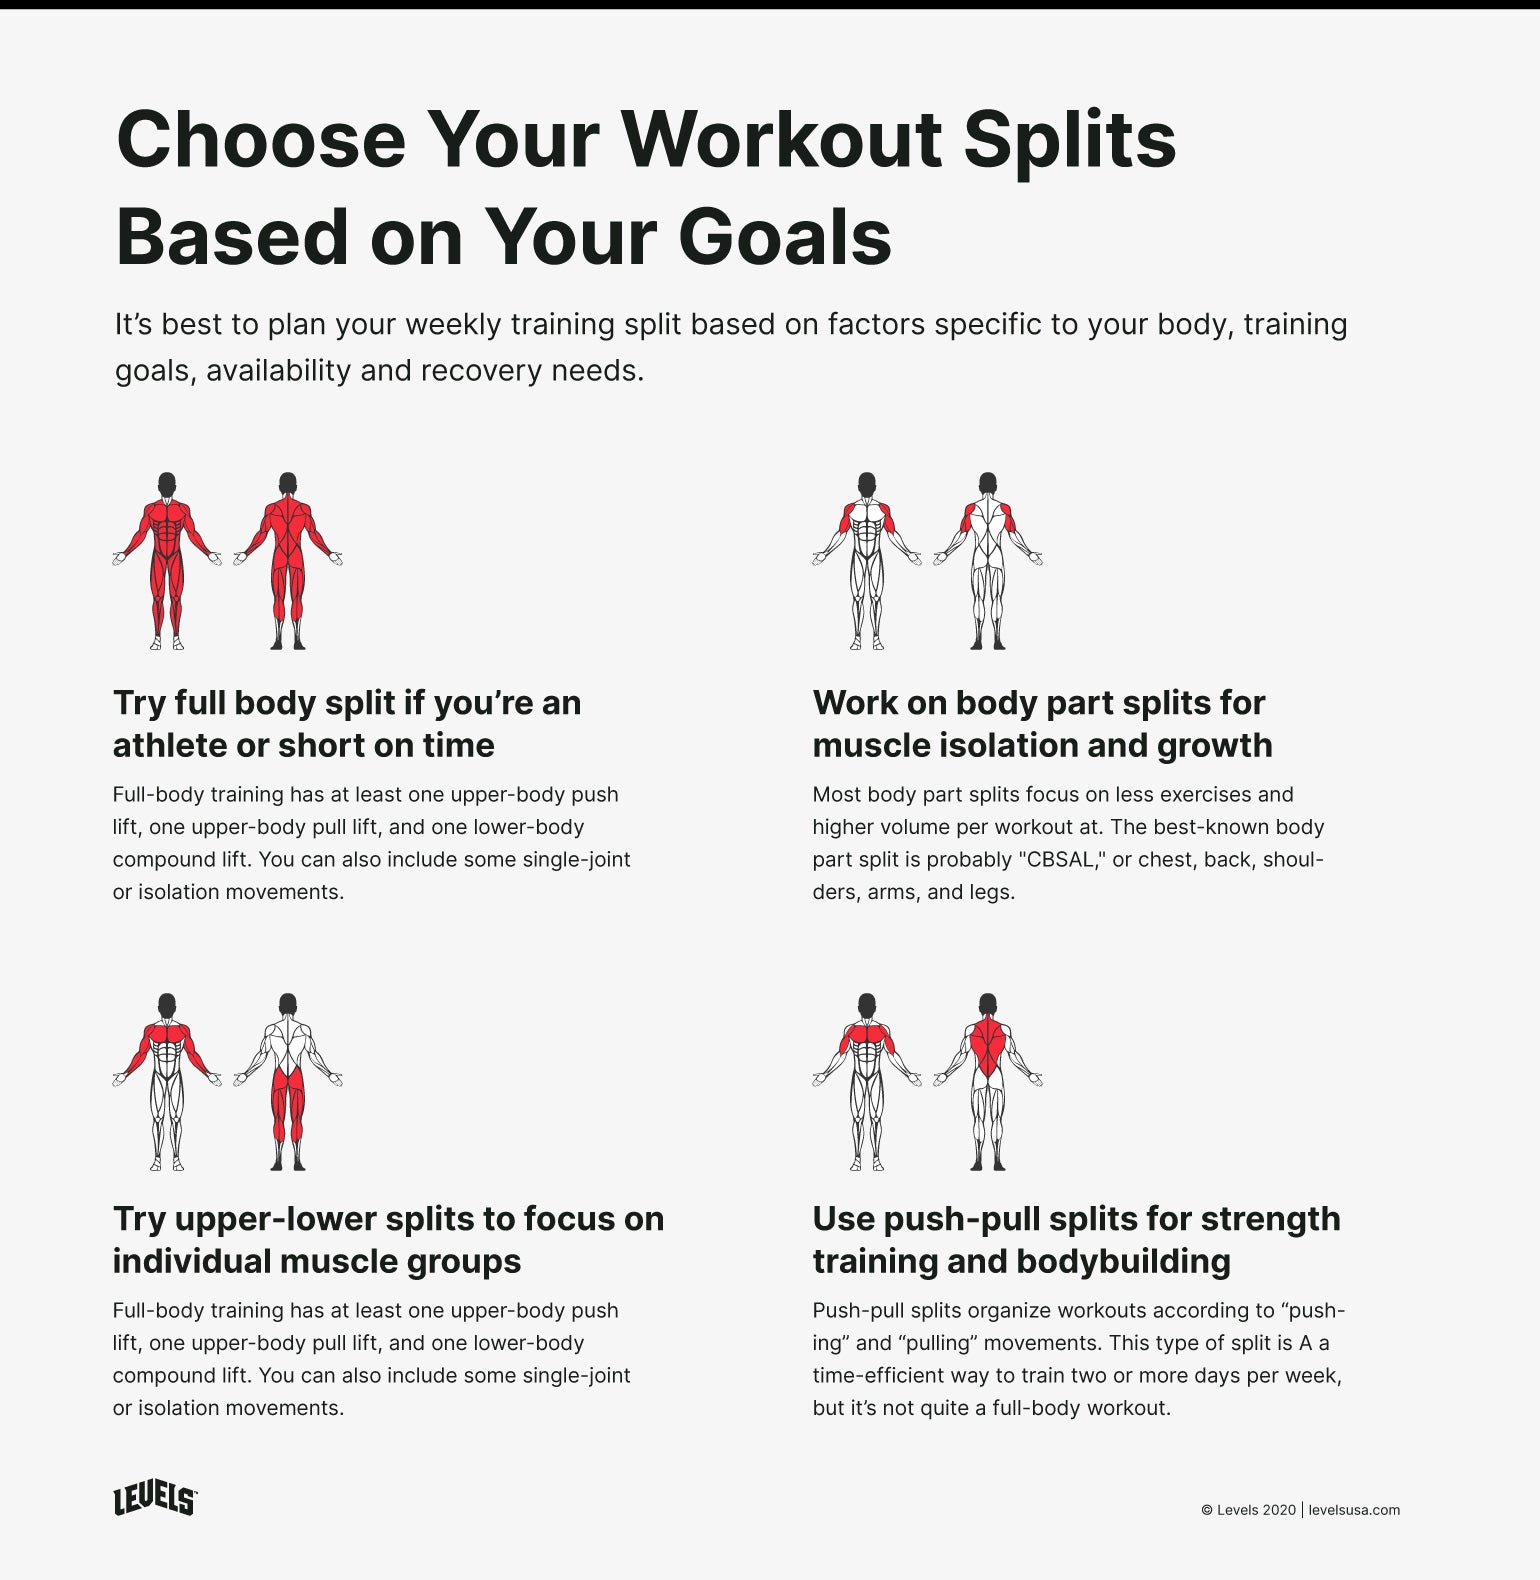 3-Day Full Body Workout Routine: How To Split Your Training To